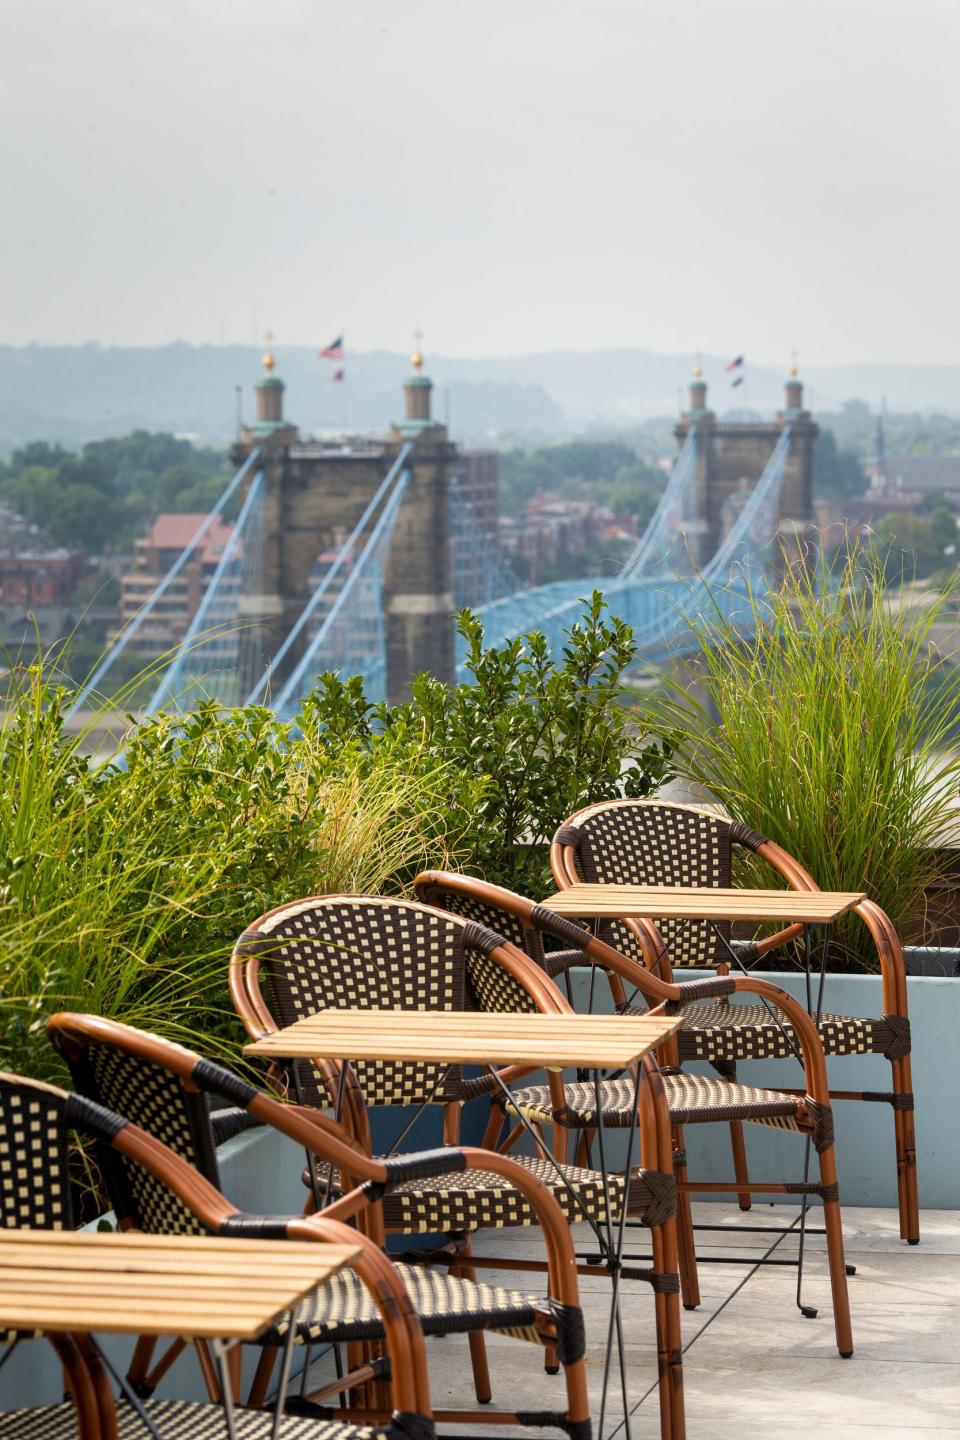 The View at Shires' Garden will have Mother's Day brunch from 10 a.m. to 3 p.m. May 12.